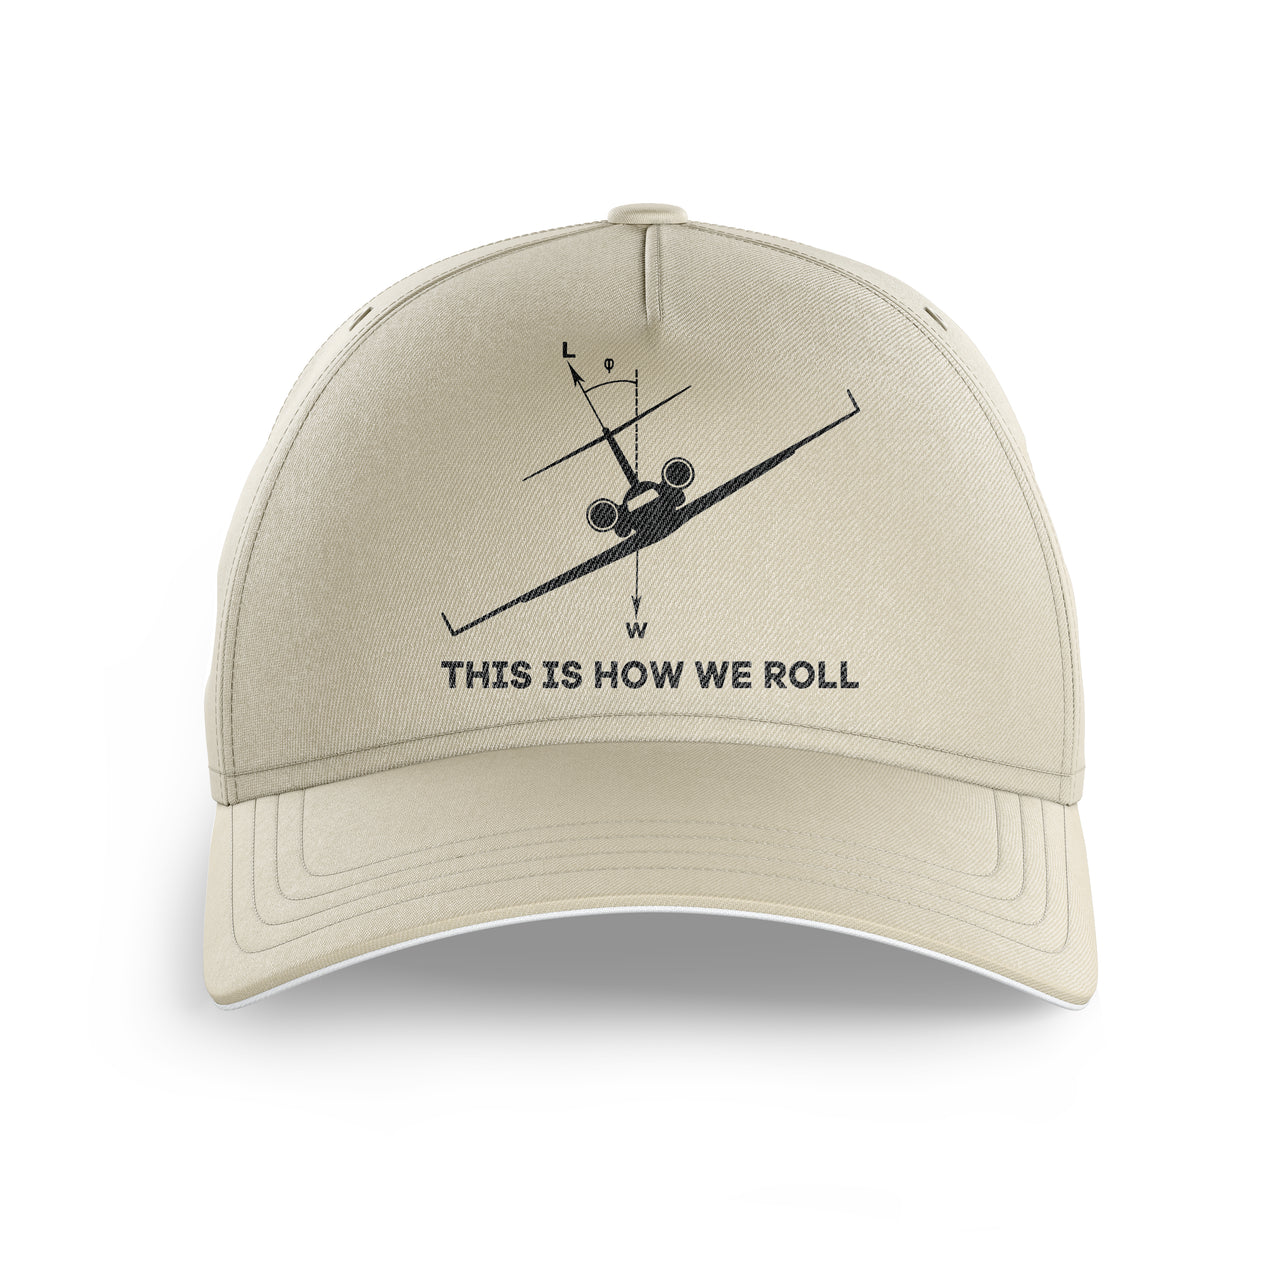 This is How We Roll Printed Hats